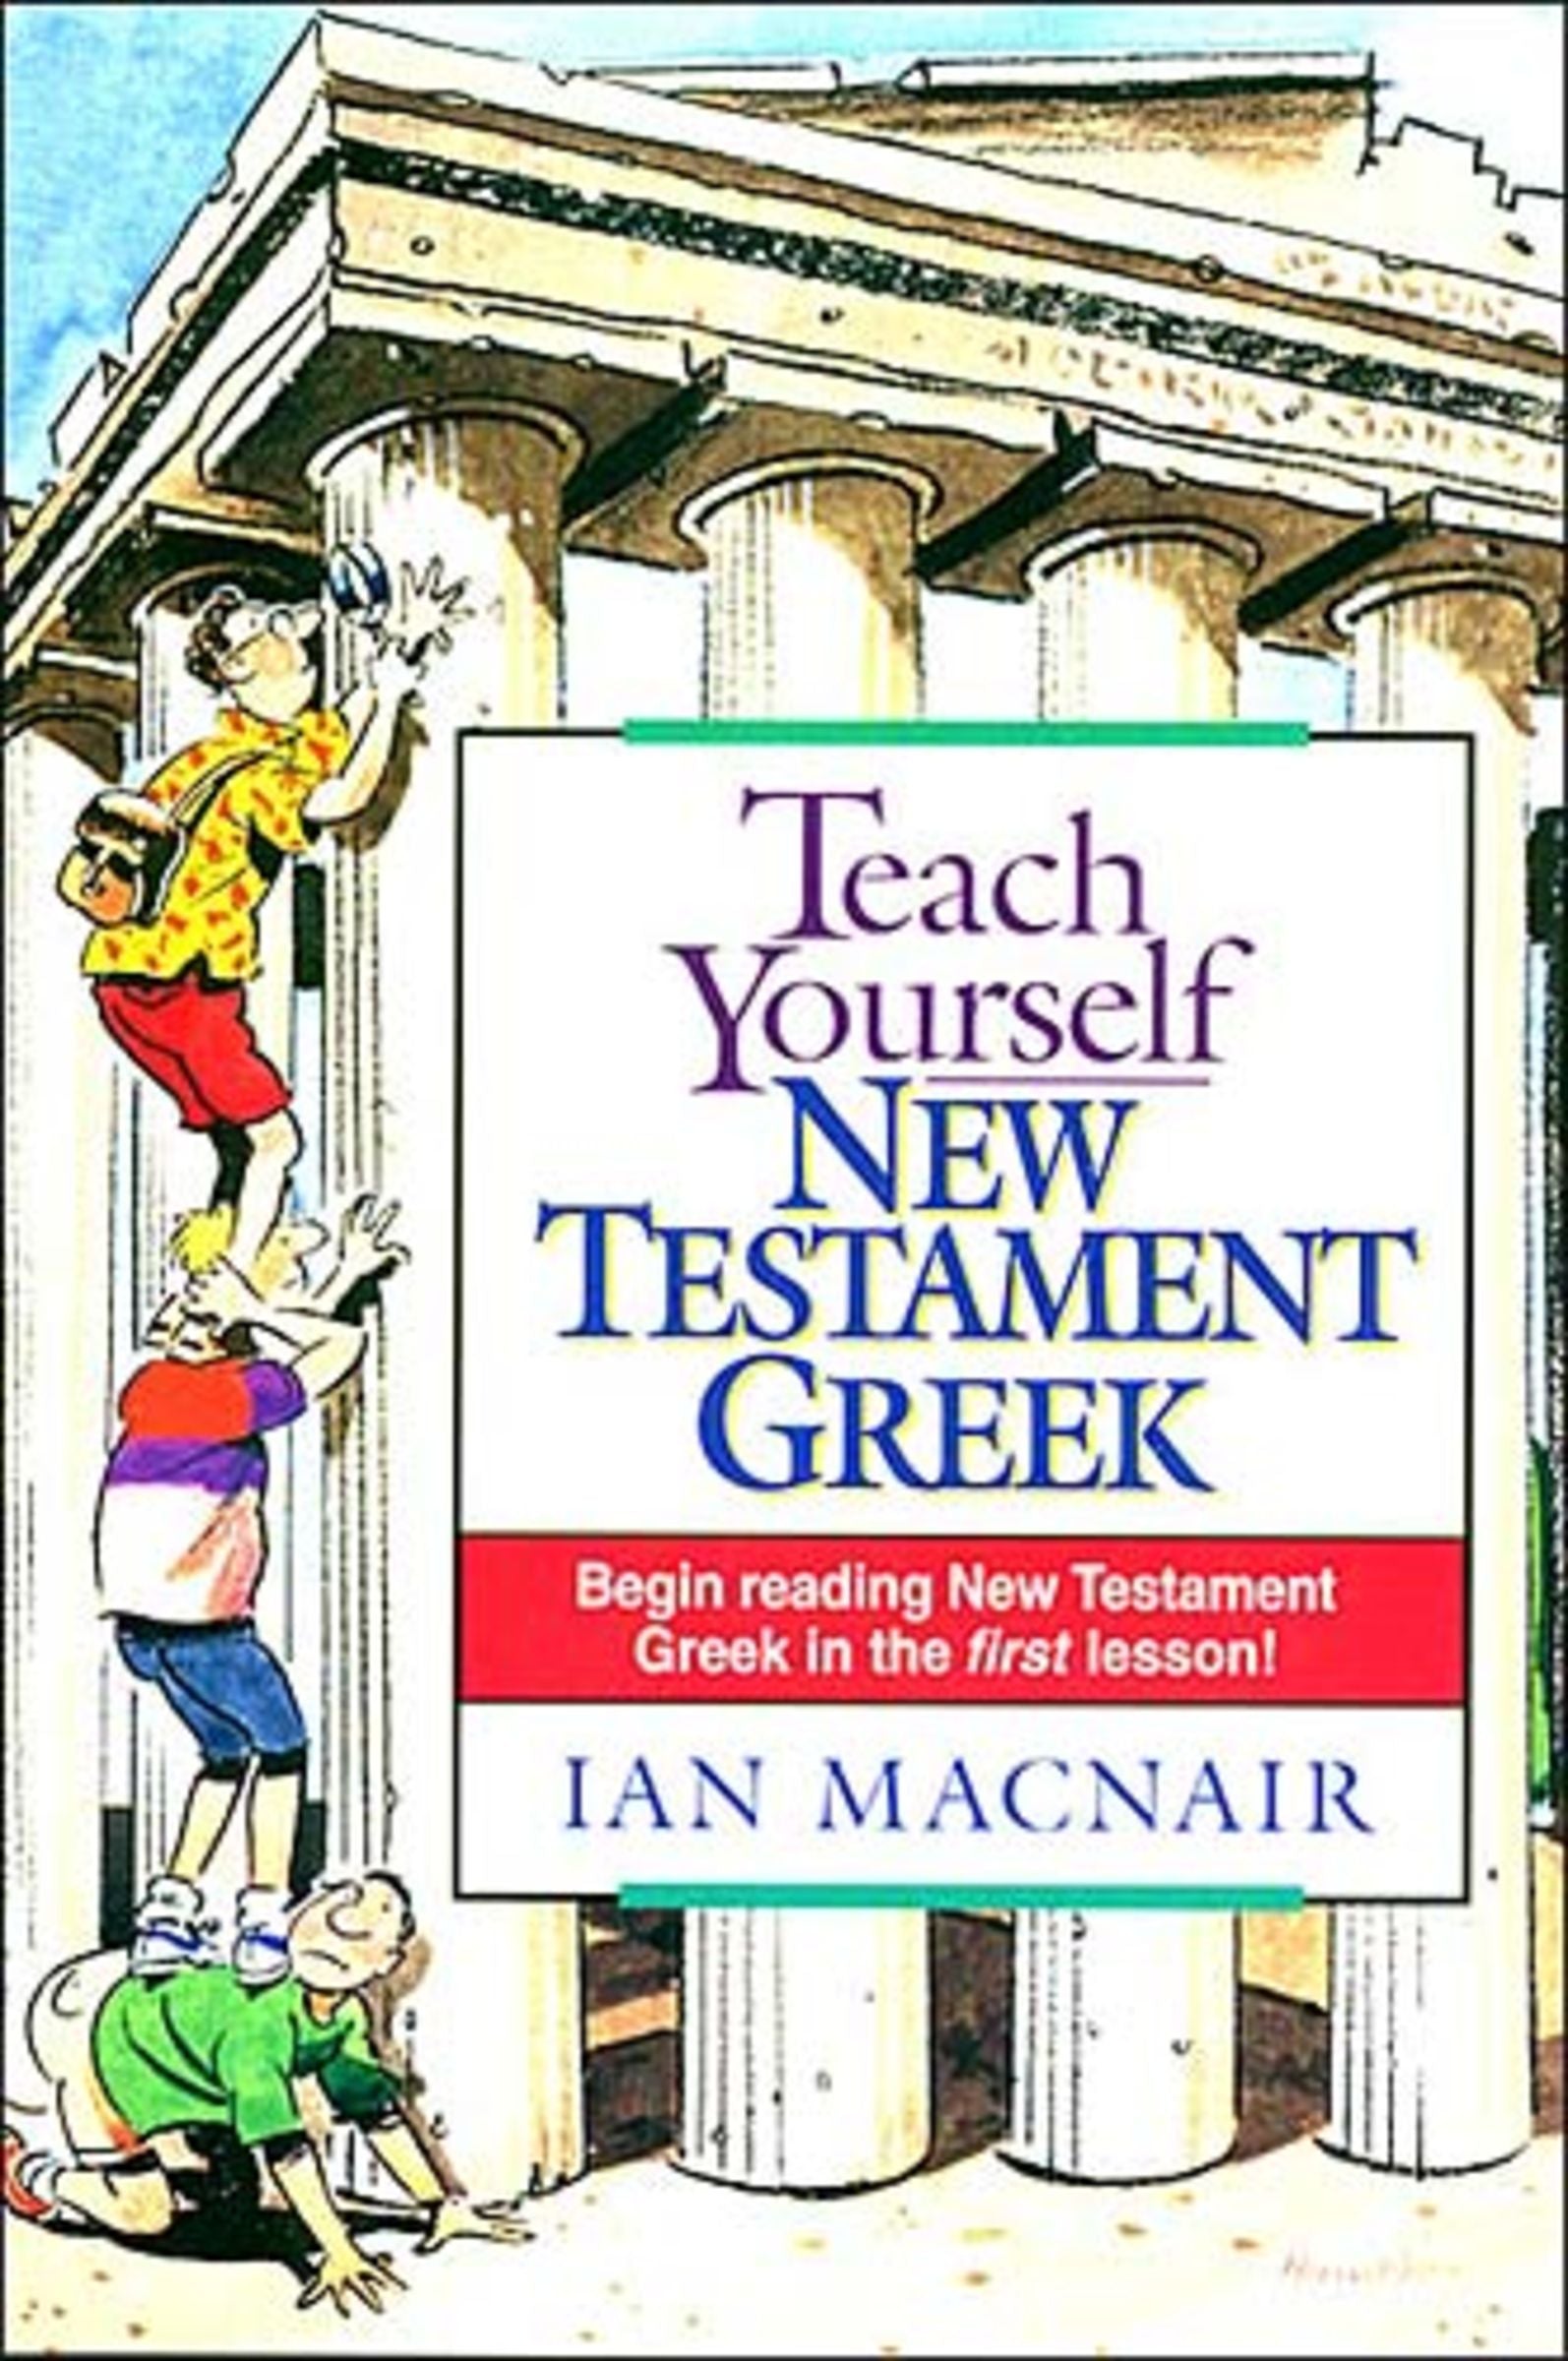 Image of Teach Yourself New Testament Greek other